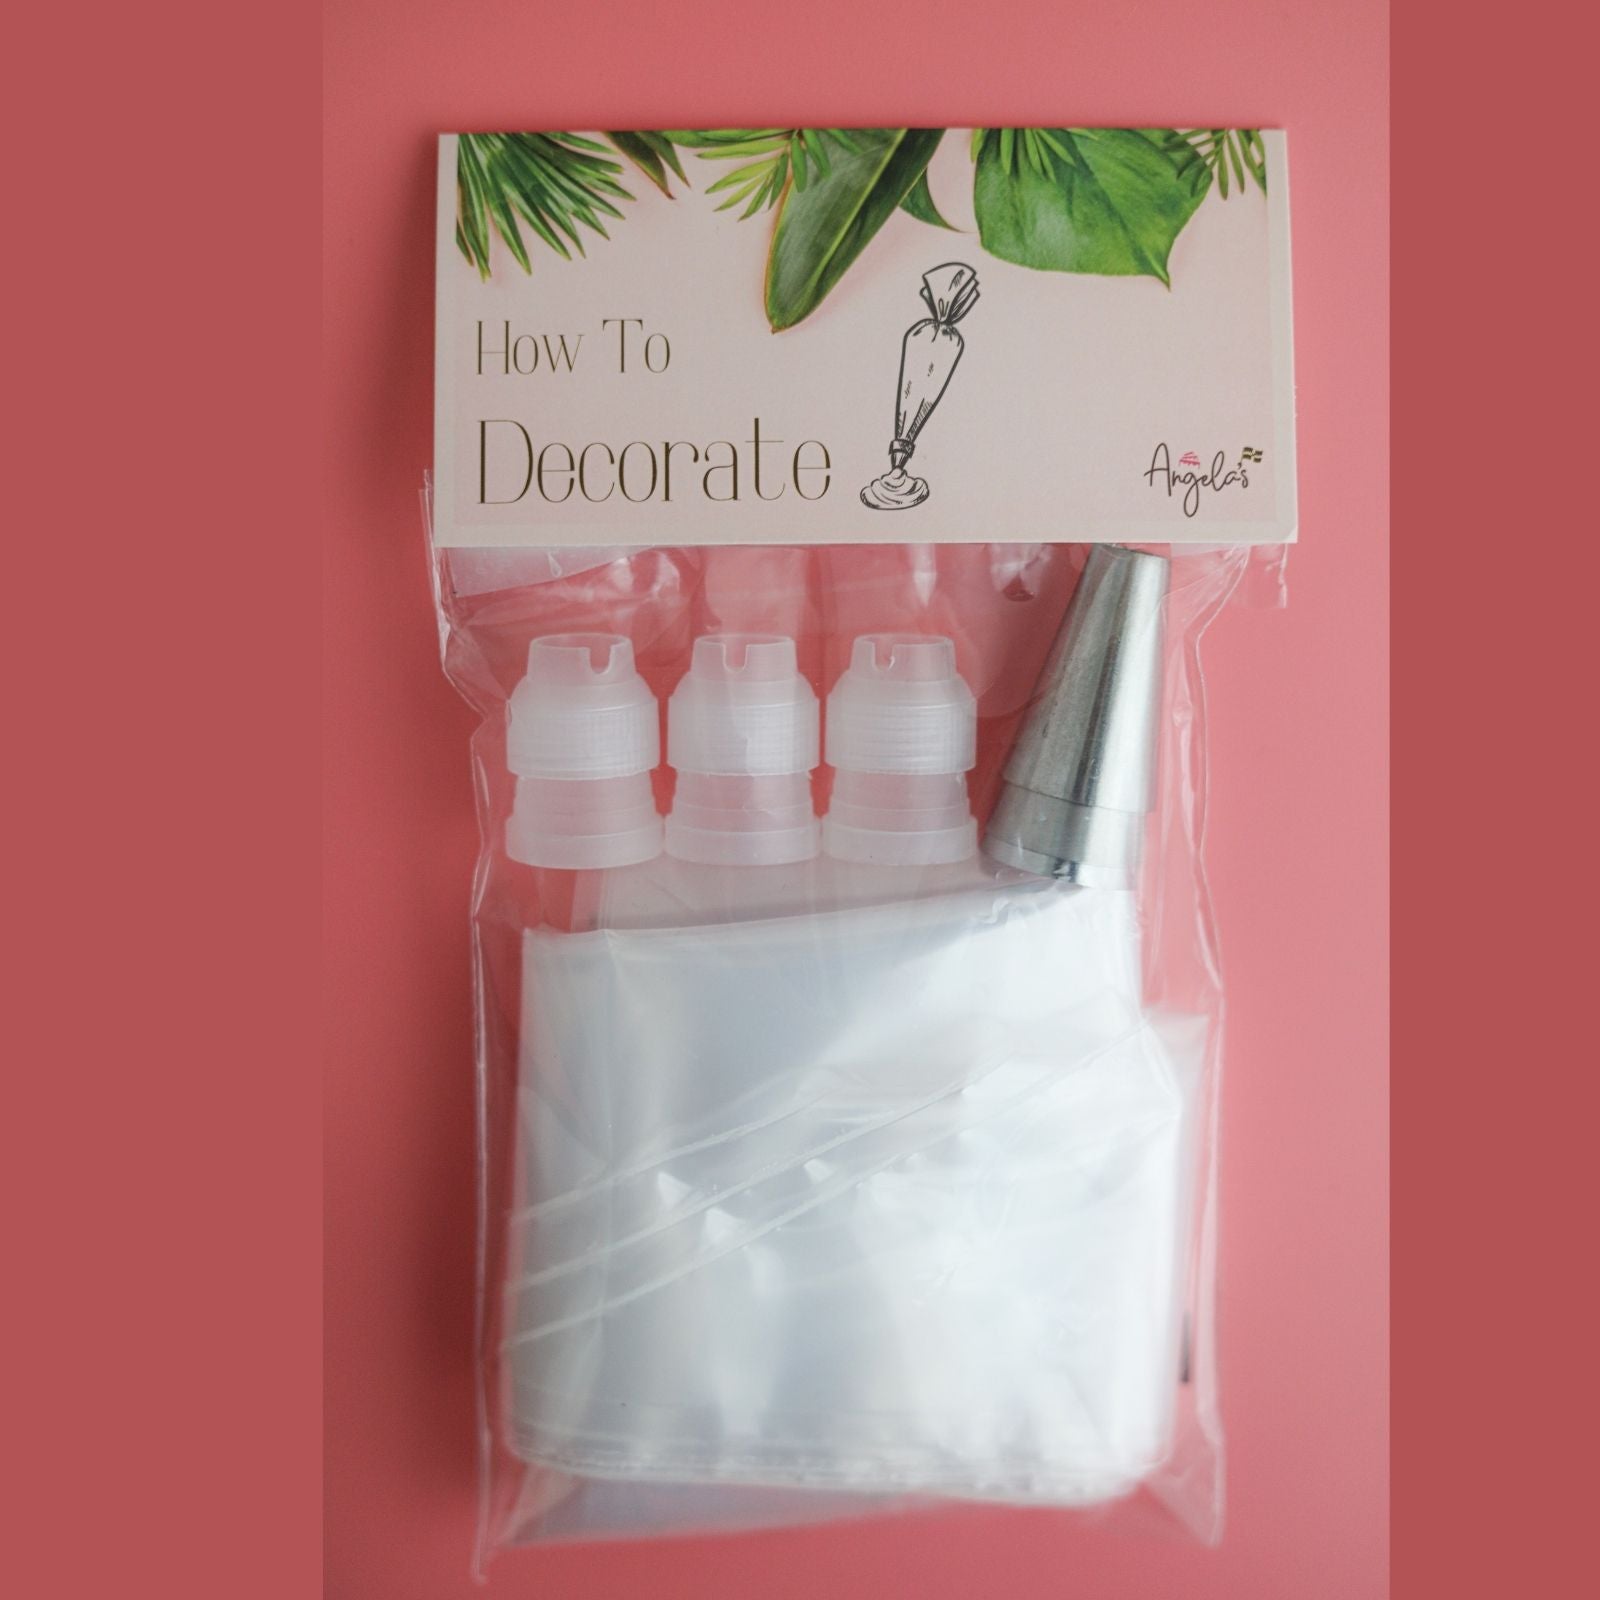 Decorating Kit for Angela's Dominican Cake Mix